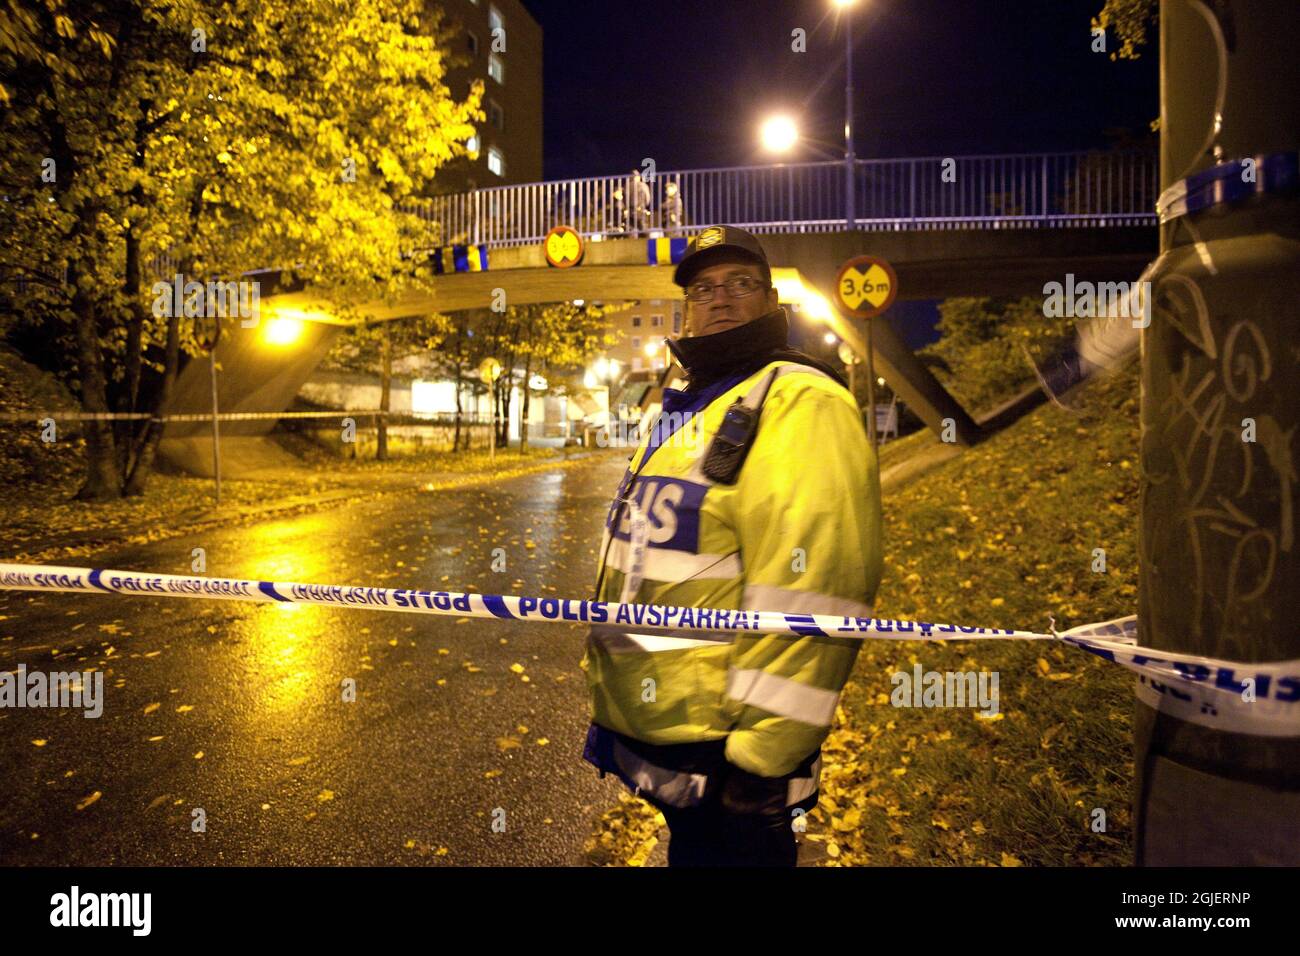 Police on the scene where two women with immigrant backgrounds were shot through an apartment window at Sorbacksgatan in Malmo, Sweden. The south Swedish city of Malmo has been shaken by at least 10 to 15 shootings aimed at persons with immigrant background over the last year. One victim has died and several are suffering from serious injuries. The police in Malmo suspect one person is behind a majority of the shootings. Stock Photo